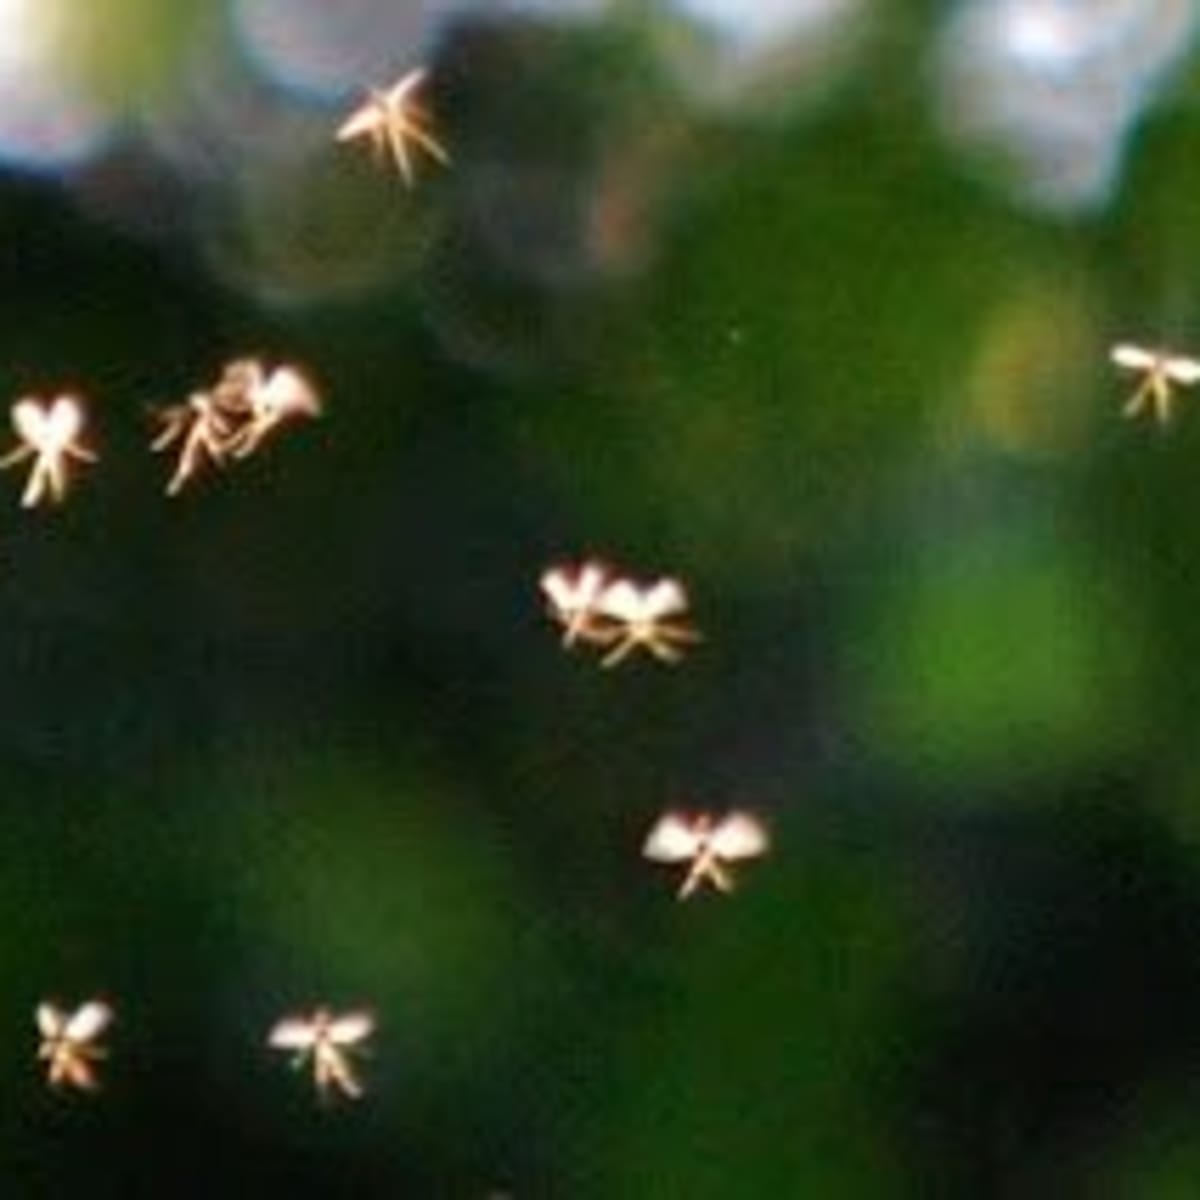 Are Fairies Real? University Professor's Photos Say Yes - HubPages